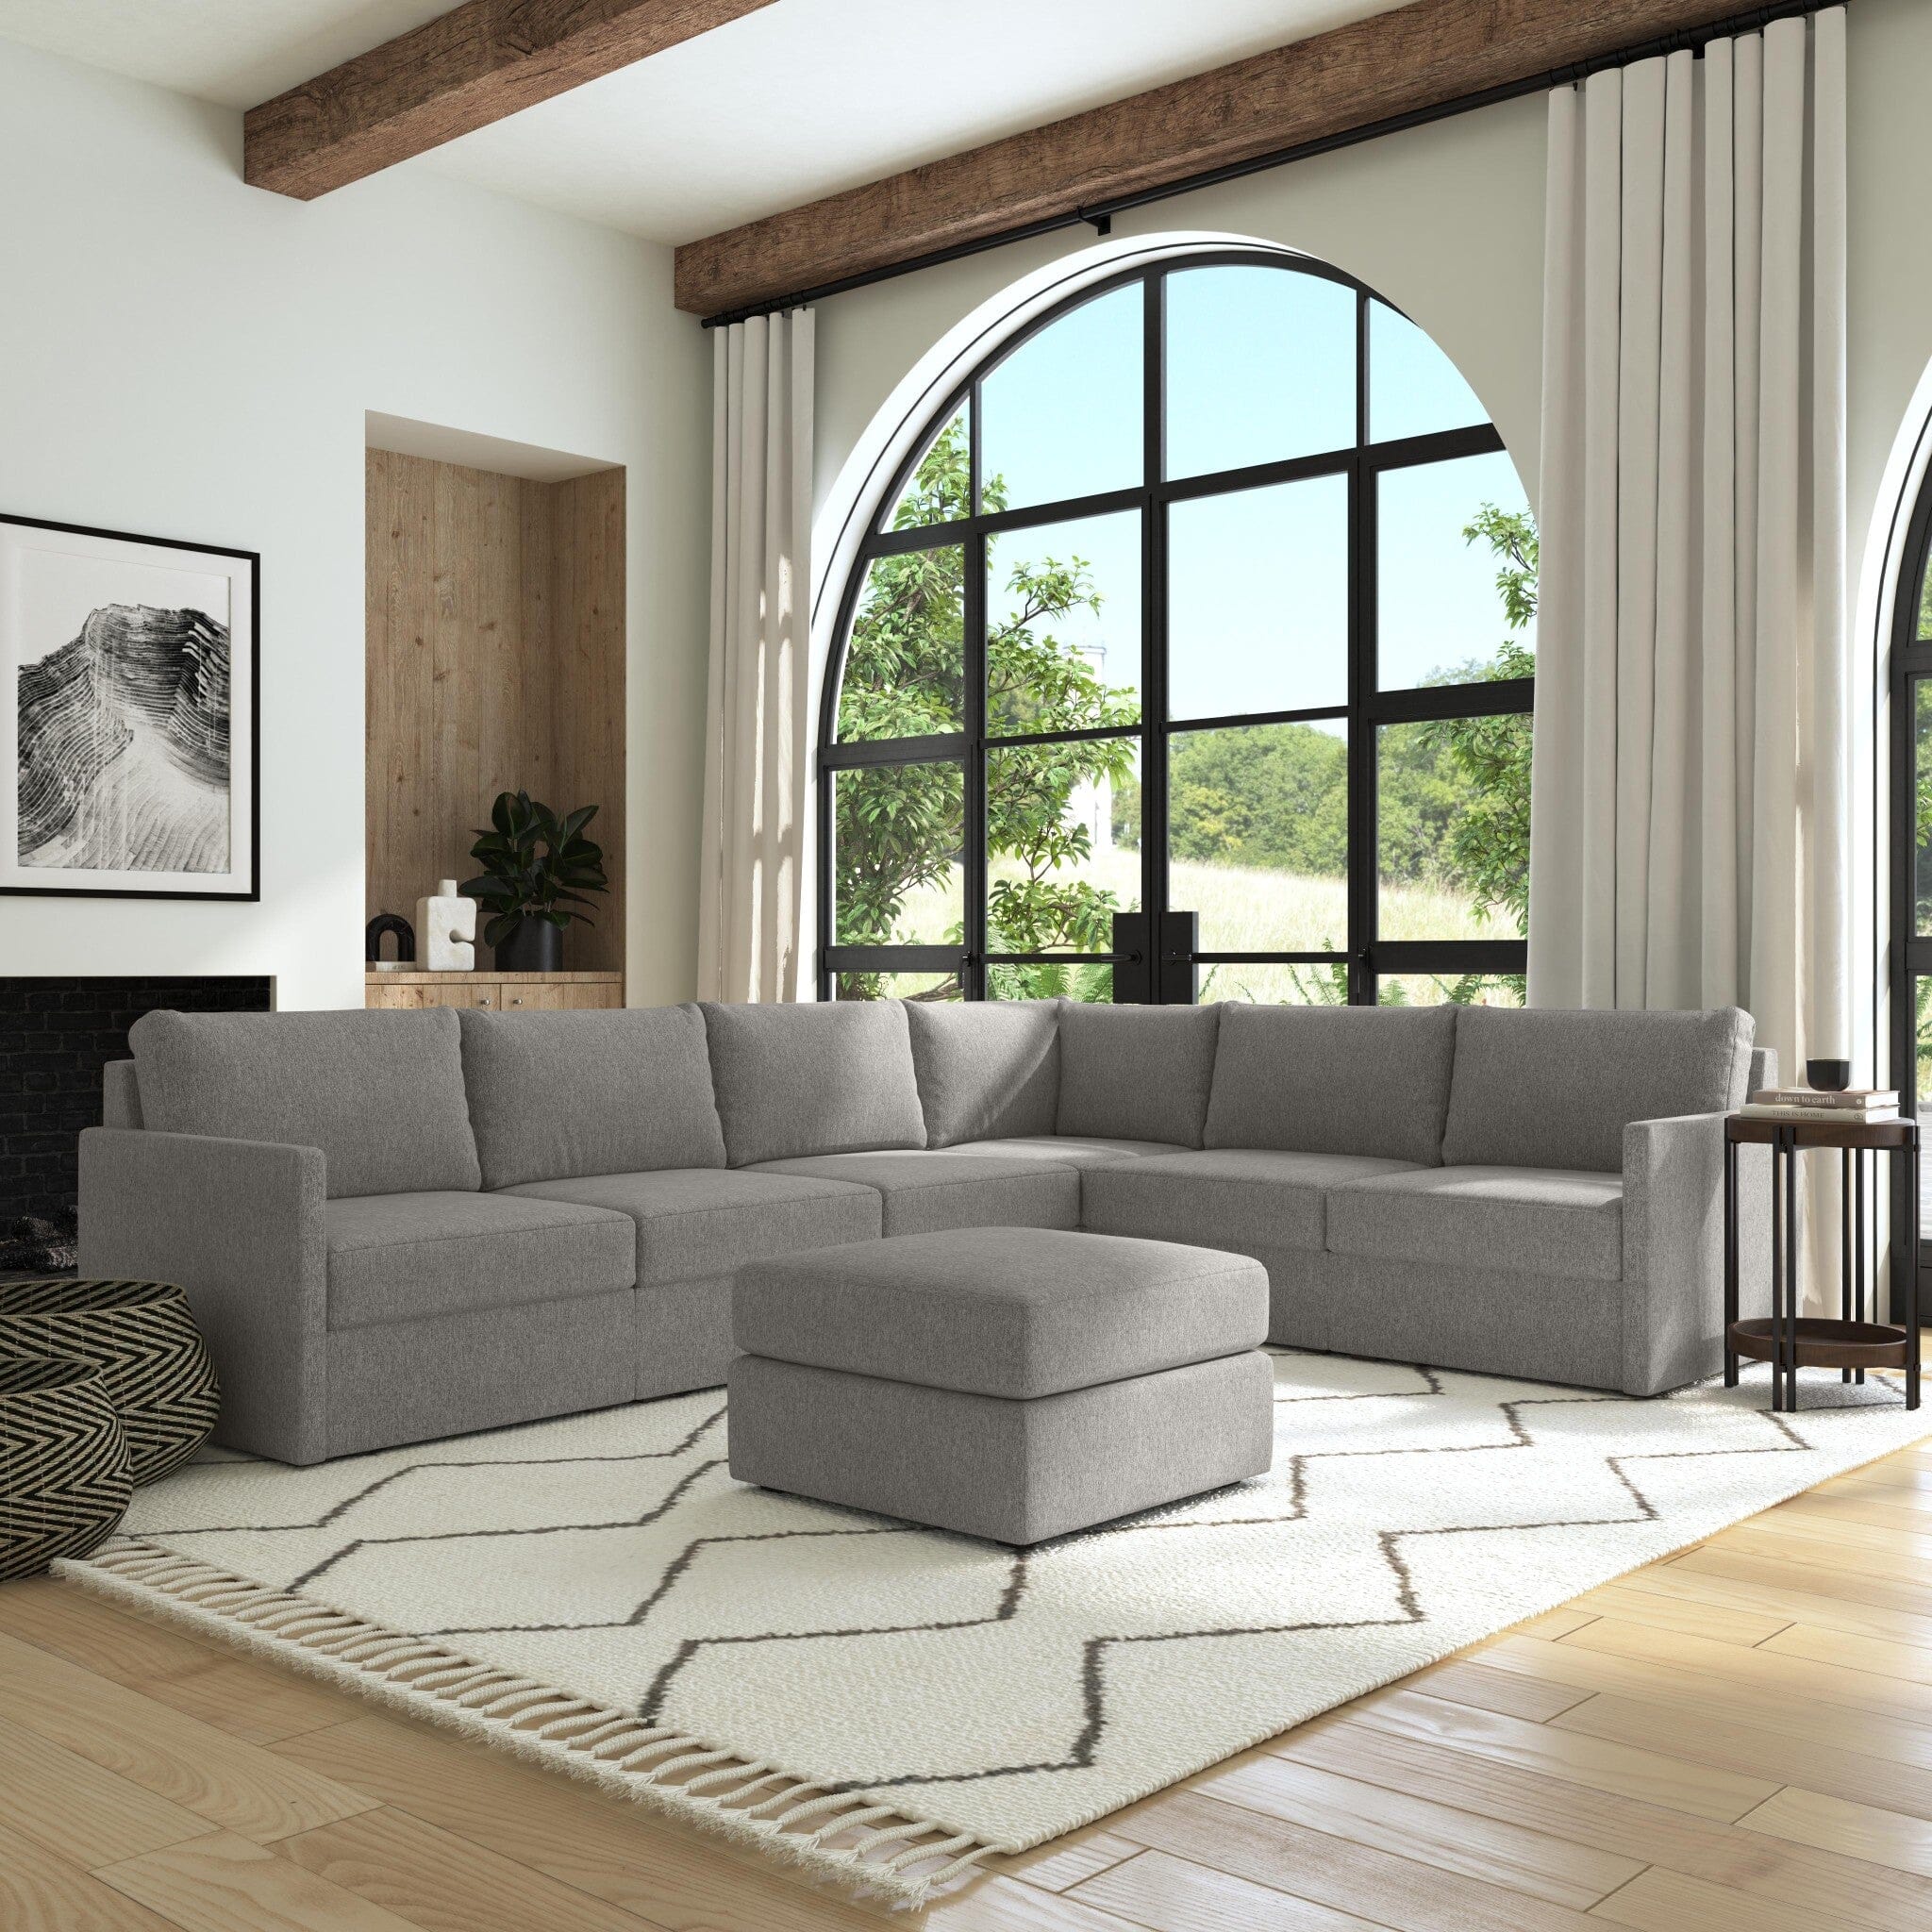 Traditional 6-Seat Sectional with Narrow Arm and Ottoman By Flex Sectional Flex